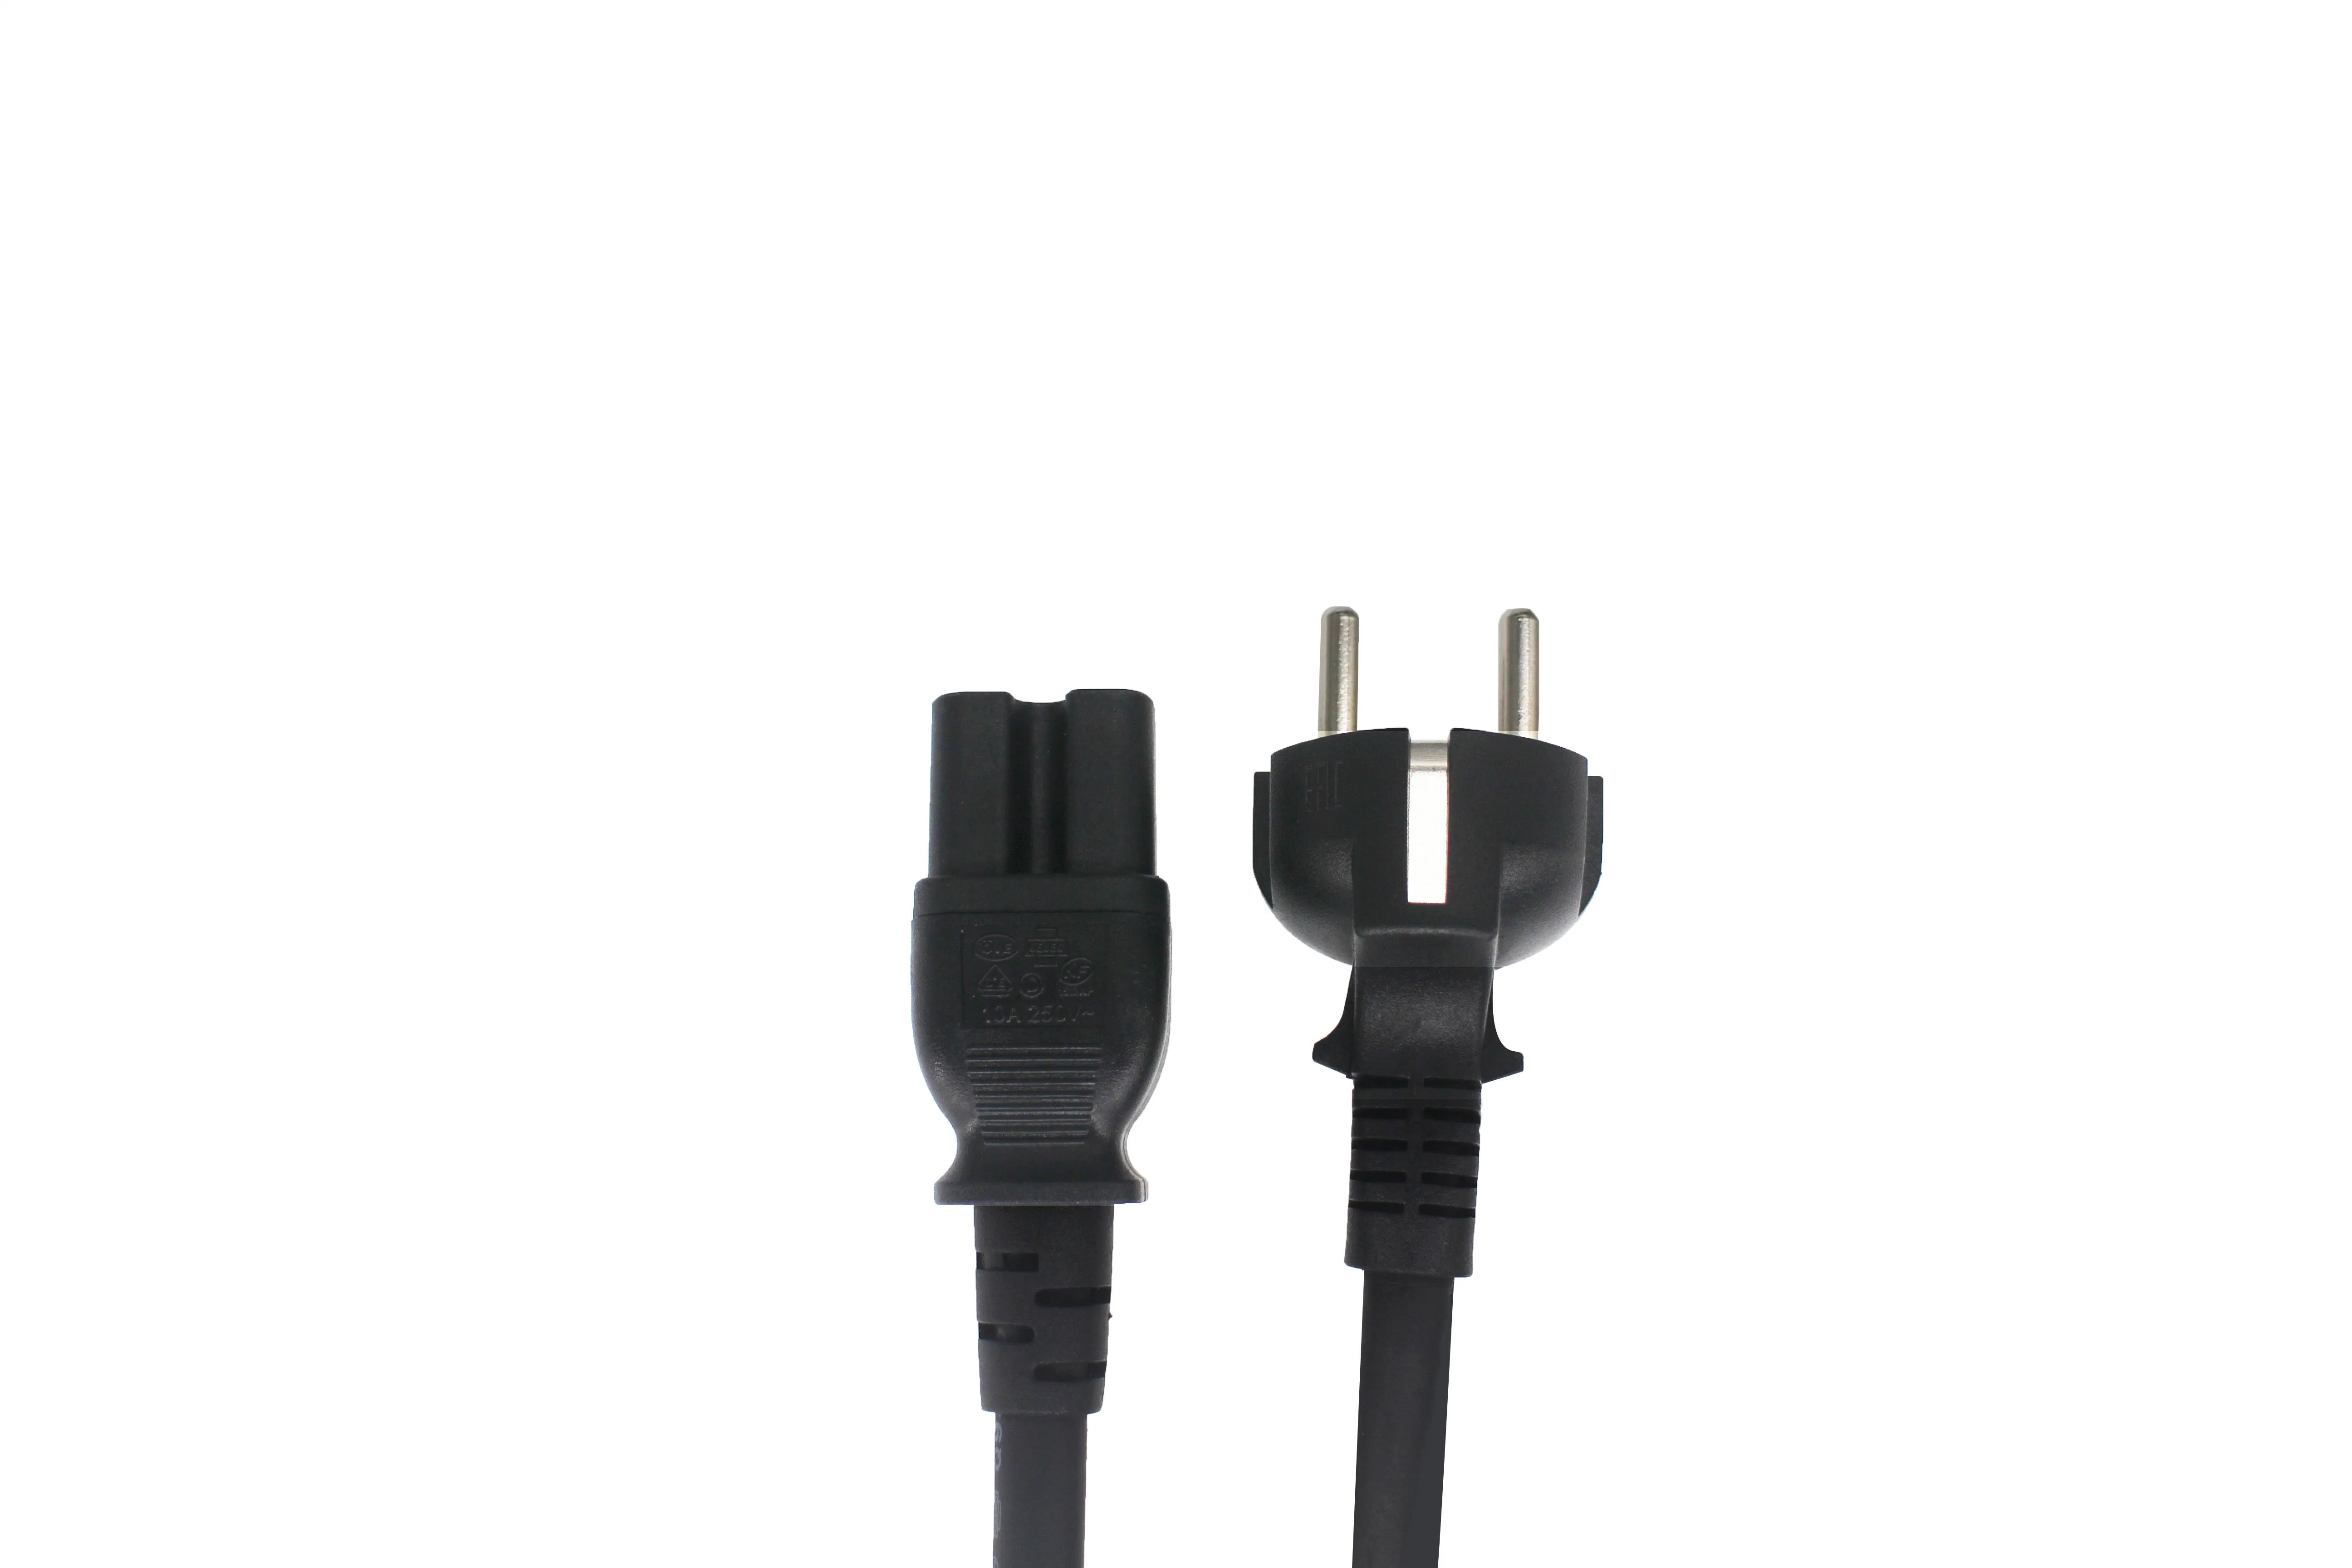 EU 2pin E Male to IEC 320 C15 Male Power Supply Power Extension Cable